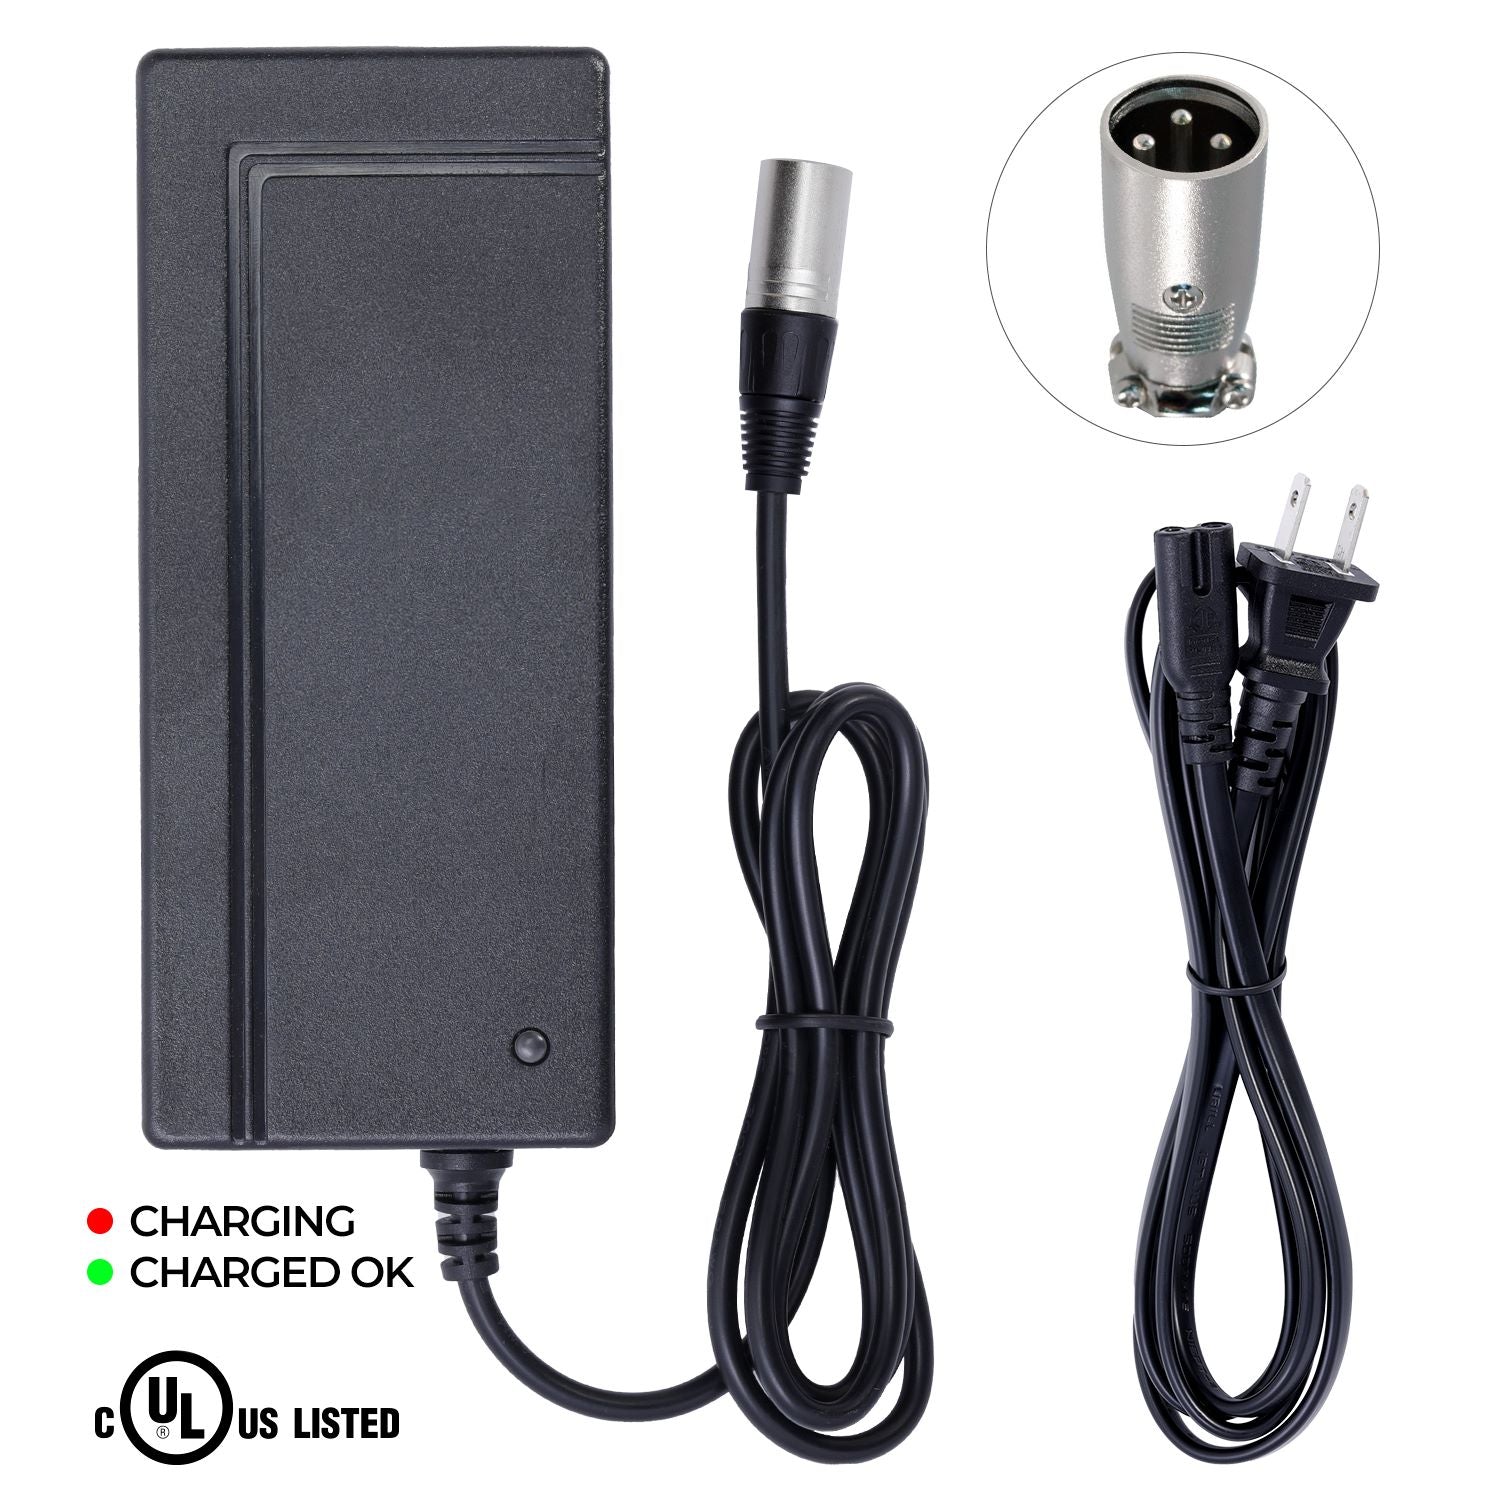 Charger for X-Treme X-650 Electric Scooter